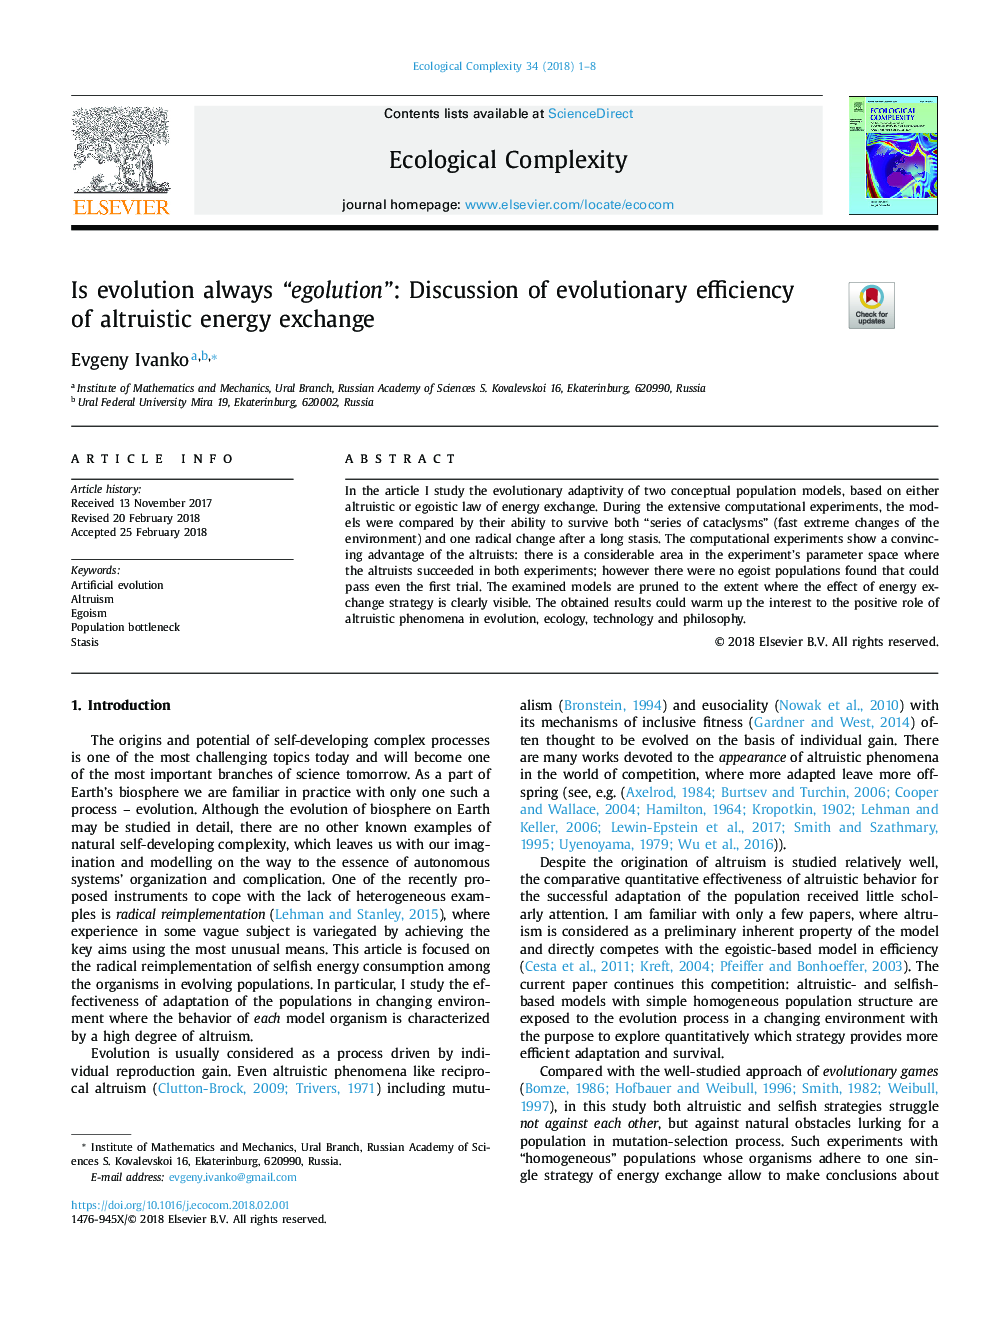 Is evolution always “egolution”: Discussion of evolutionary efficiency of altruistic energy exchange